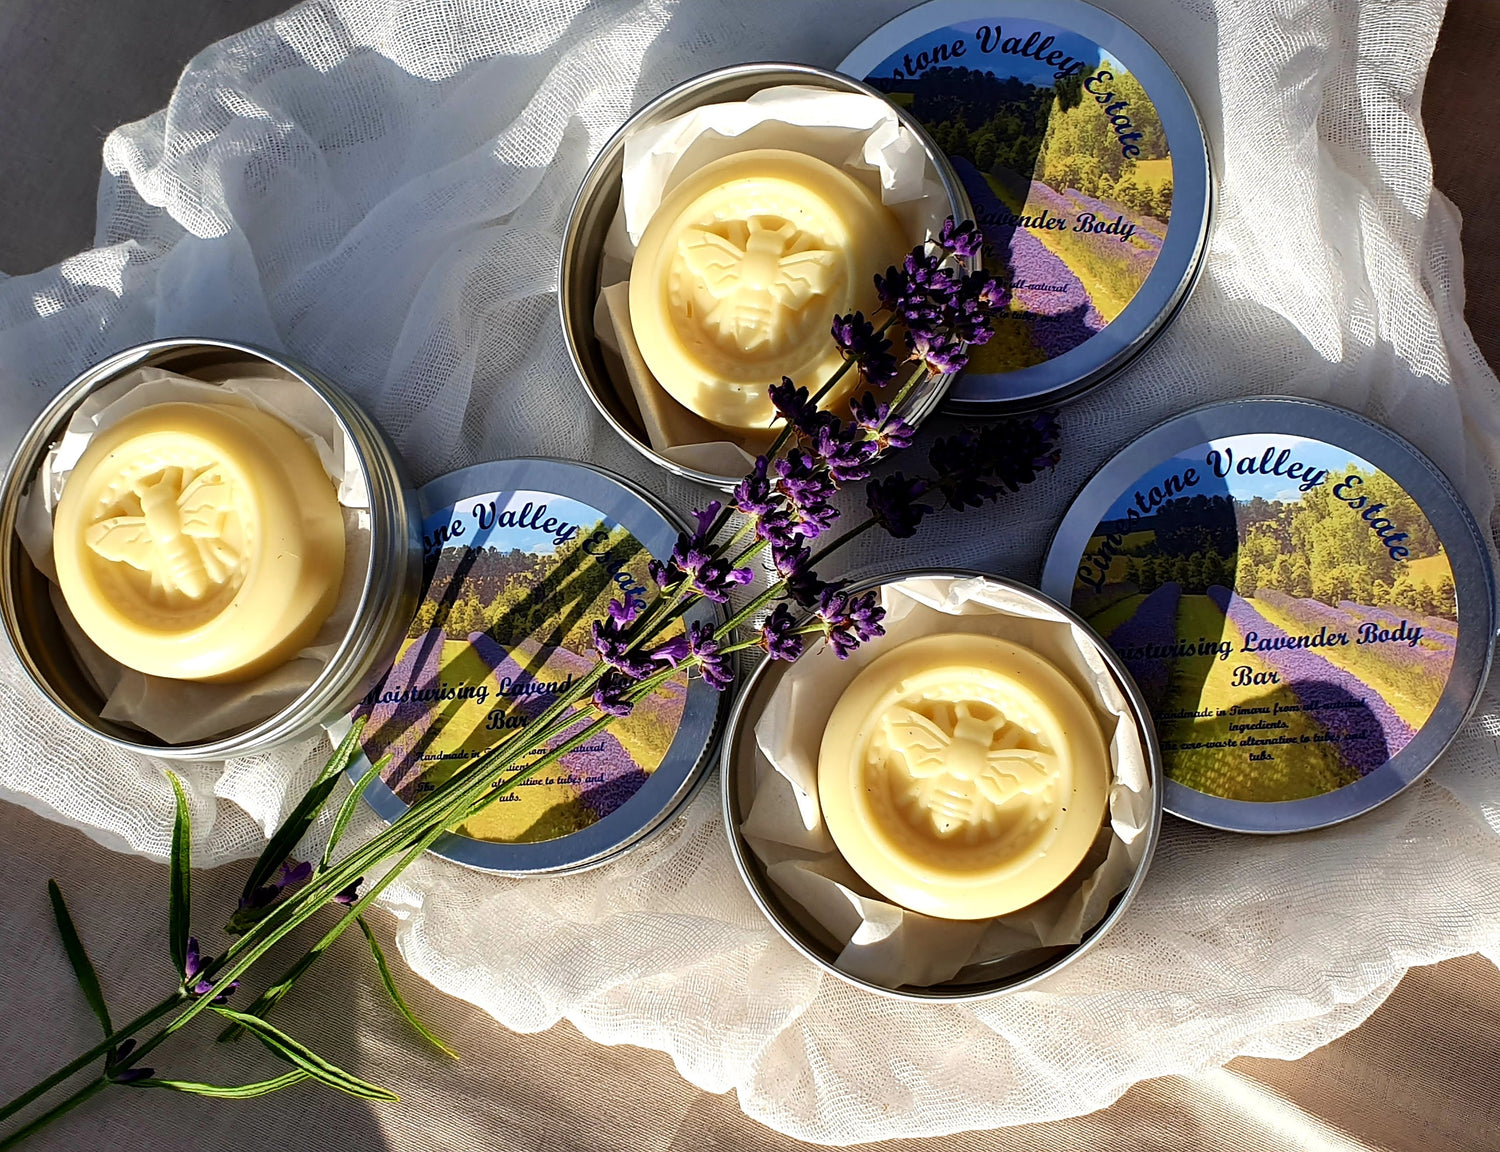 Luxurious, sustainable health and beauty products made by hand in South Canterbury, New Zealand. We use only natural ingredients and, of course, our very own lavender essential oils! 